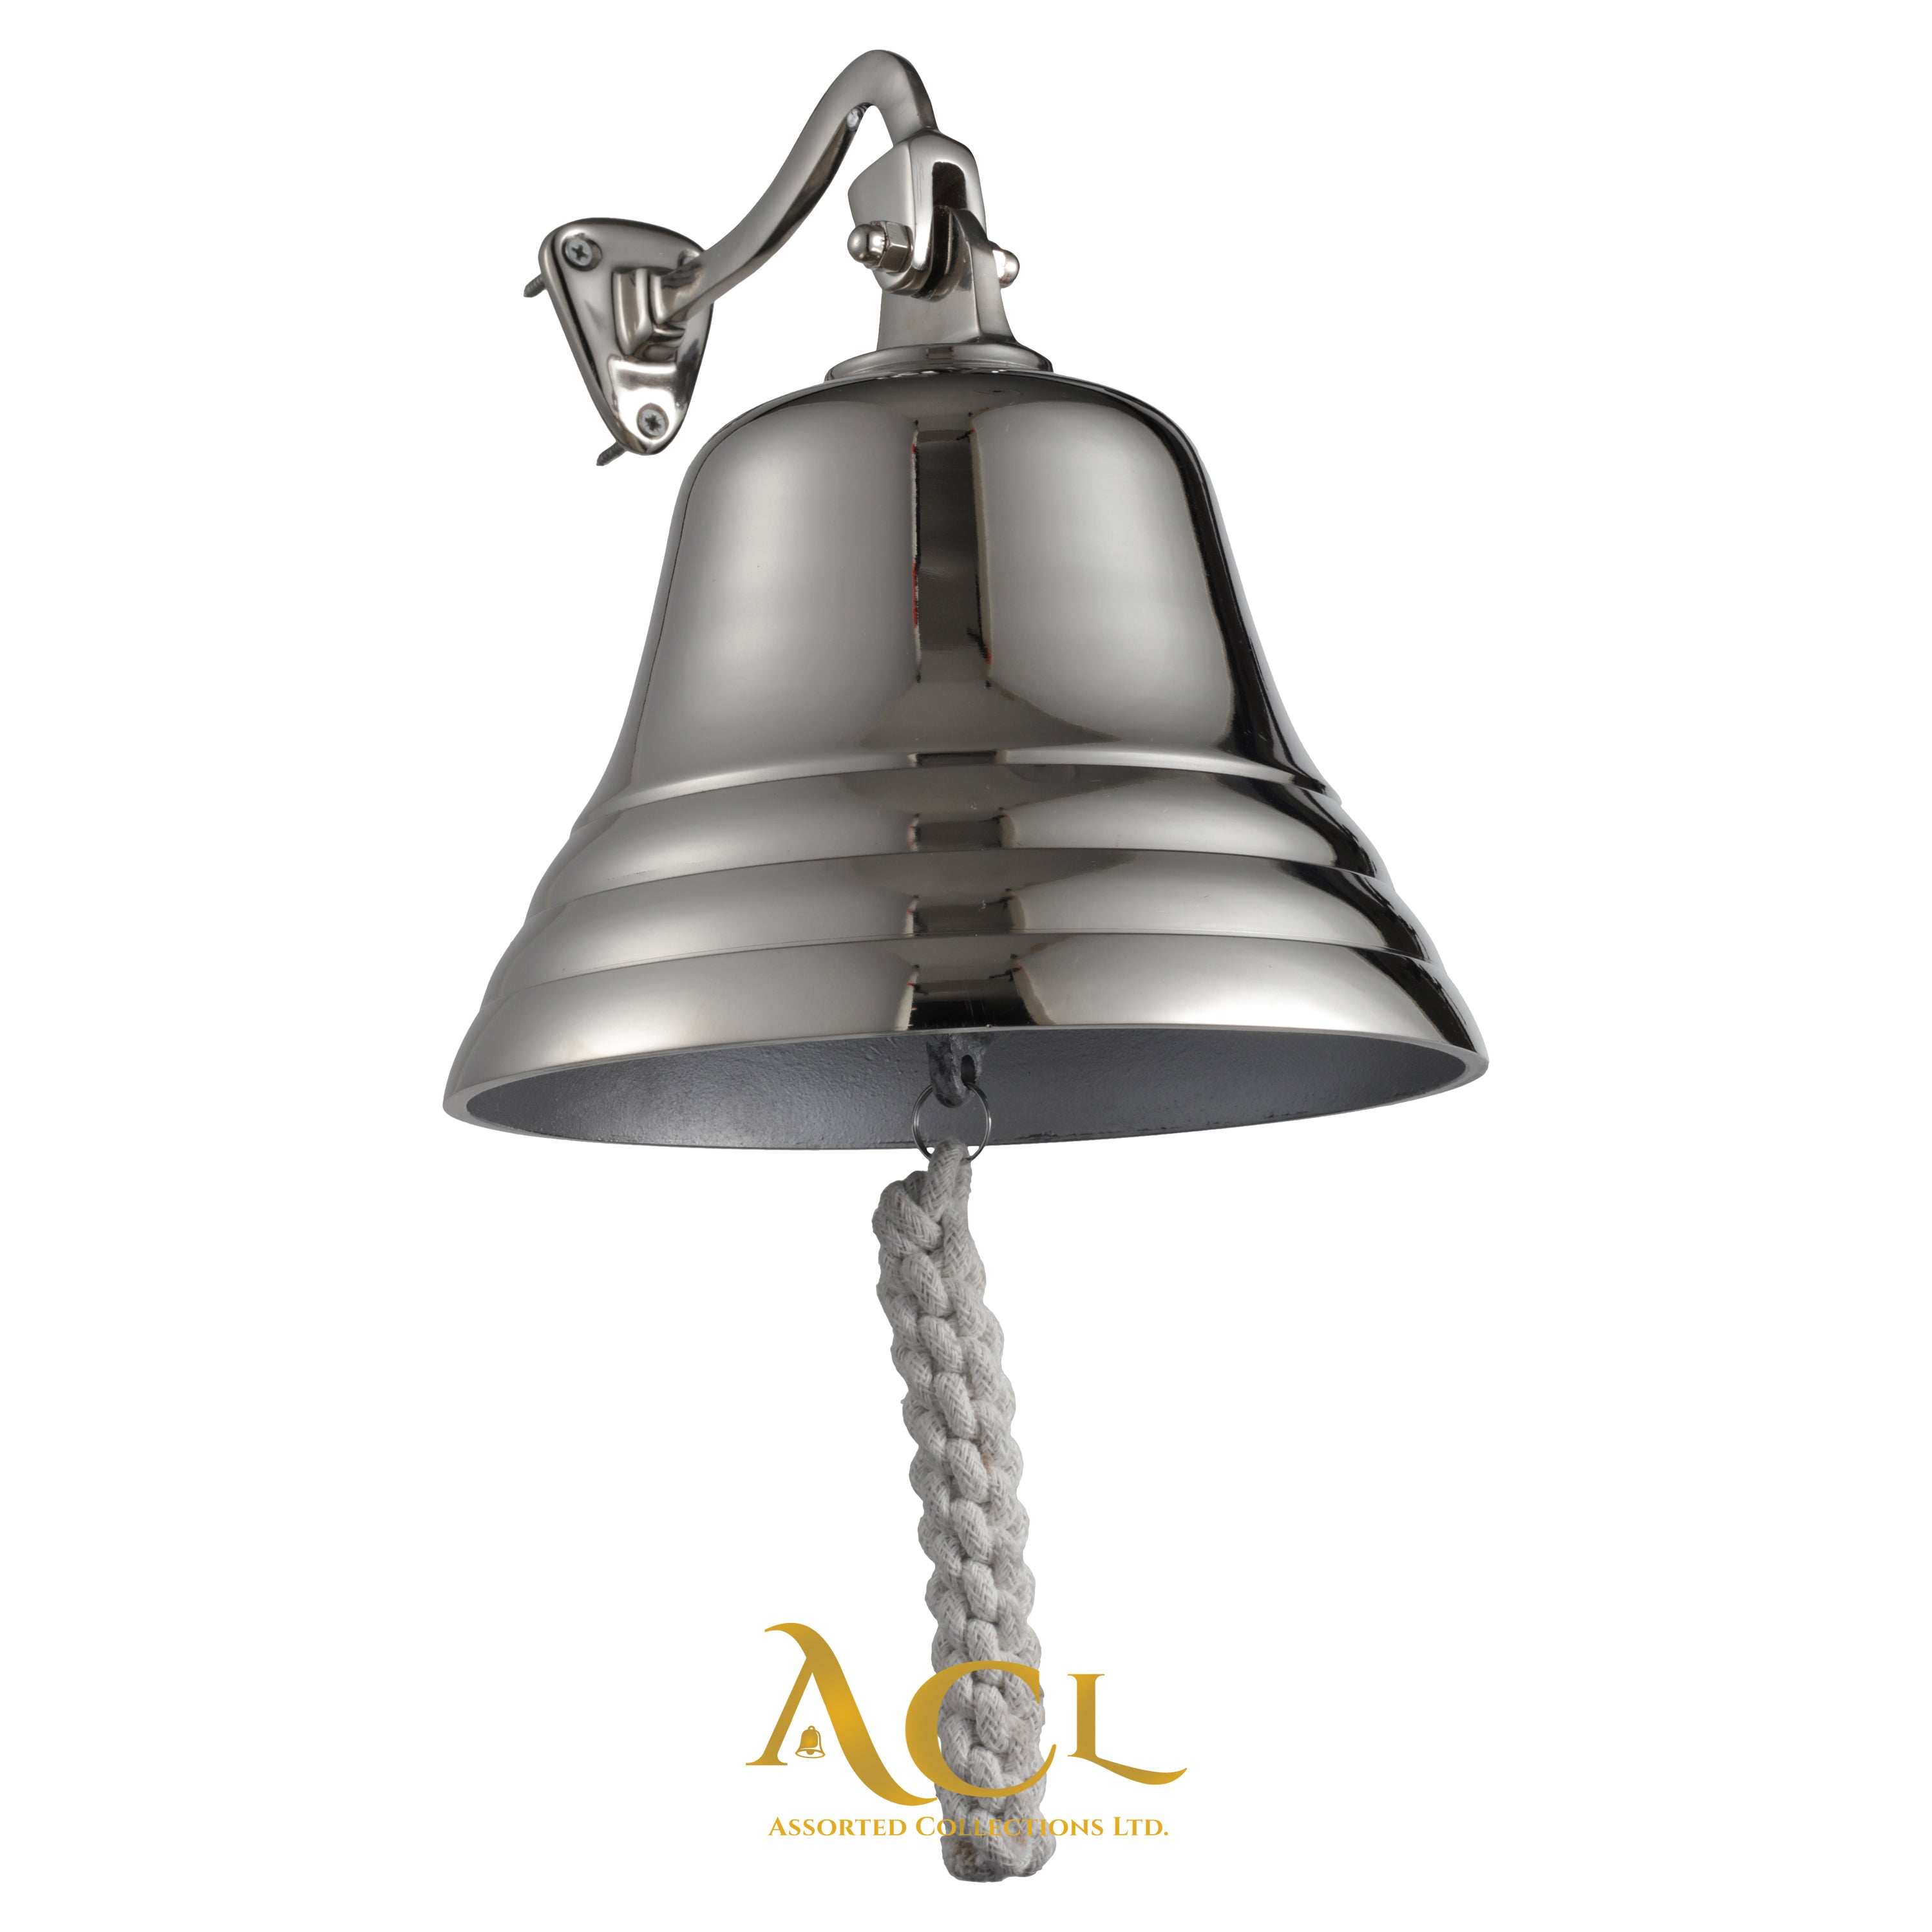 Silver Bell Wall Mounted - 8"